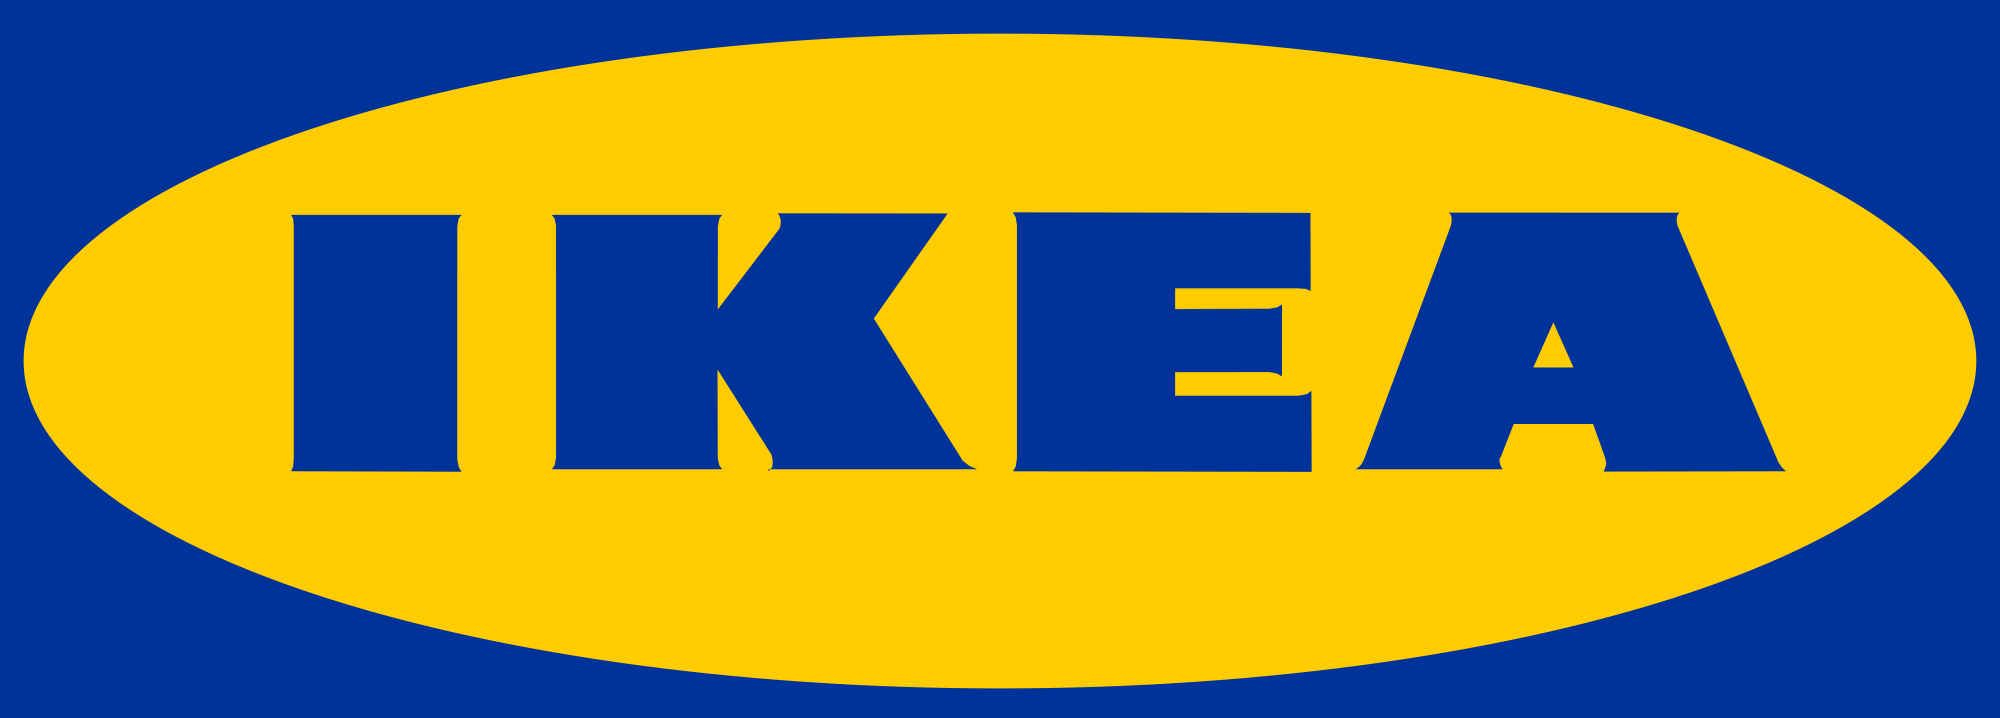 IKEA – Doing It a Different Way For the Many People